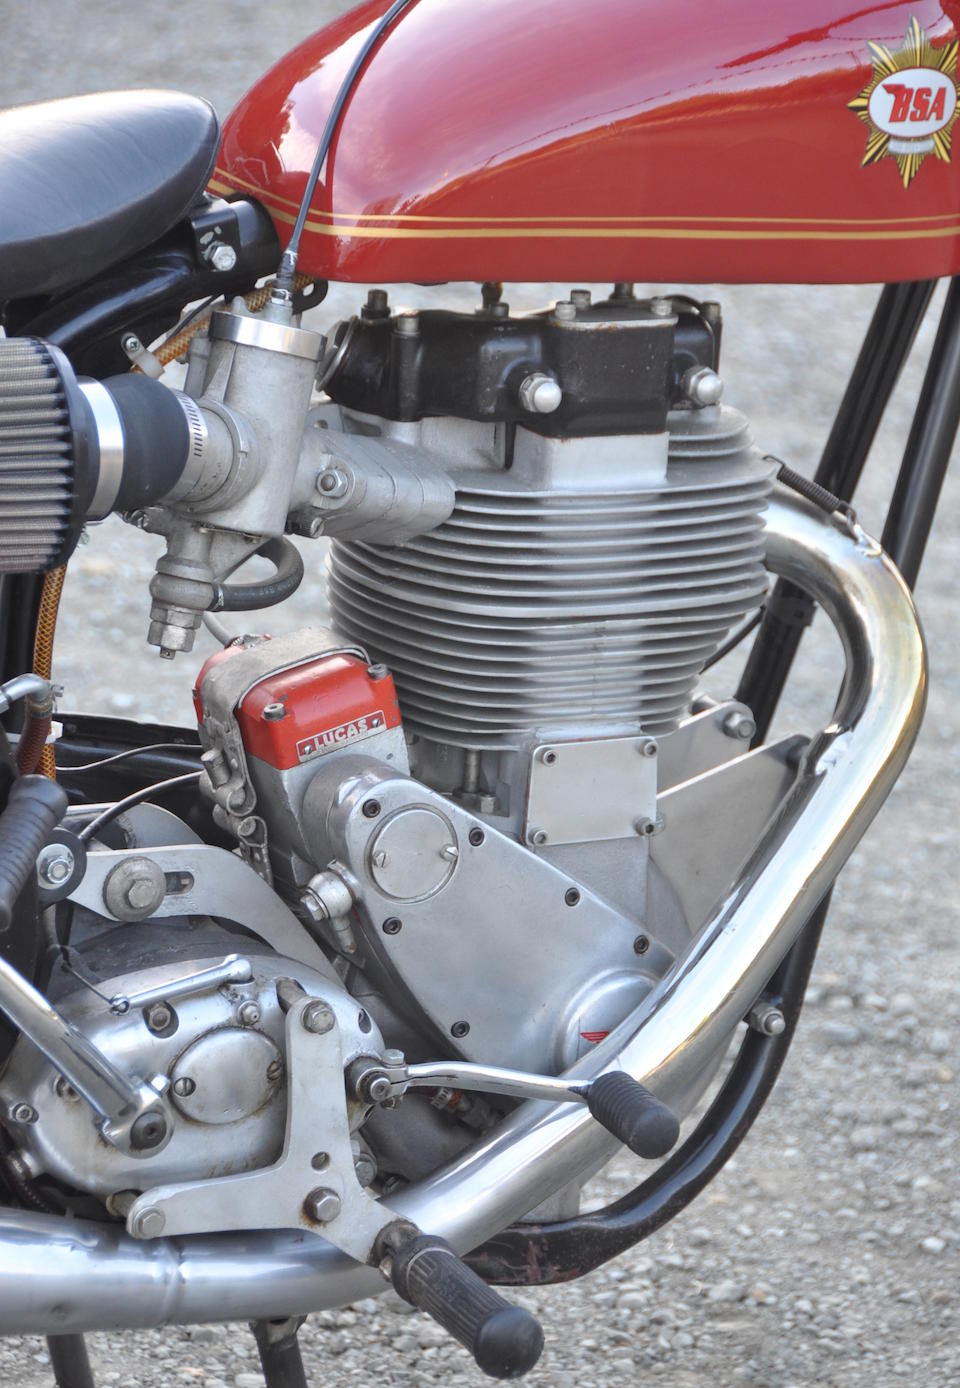 Dick Mann racebike restored by the two-time Grand National Champion,c.1965 BSA Gold Star Flat Tracker Engine no. 123